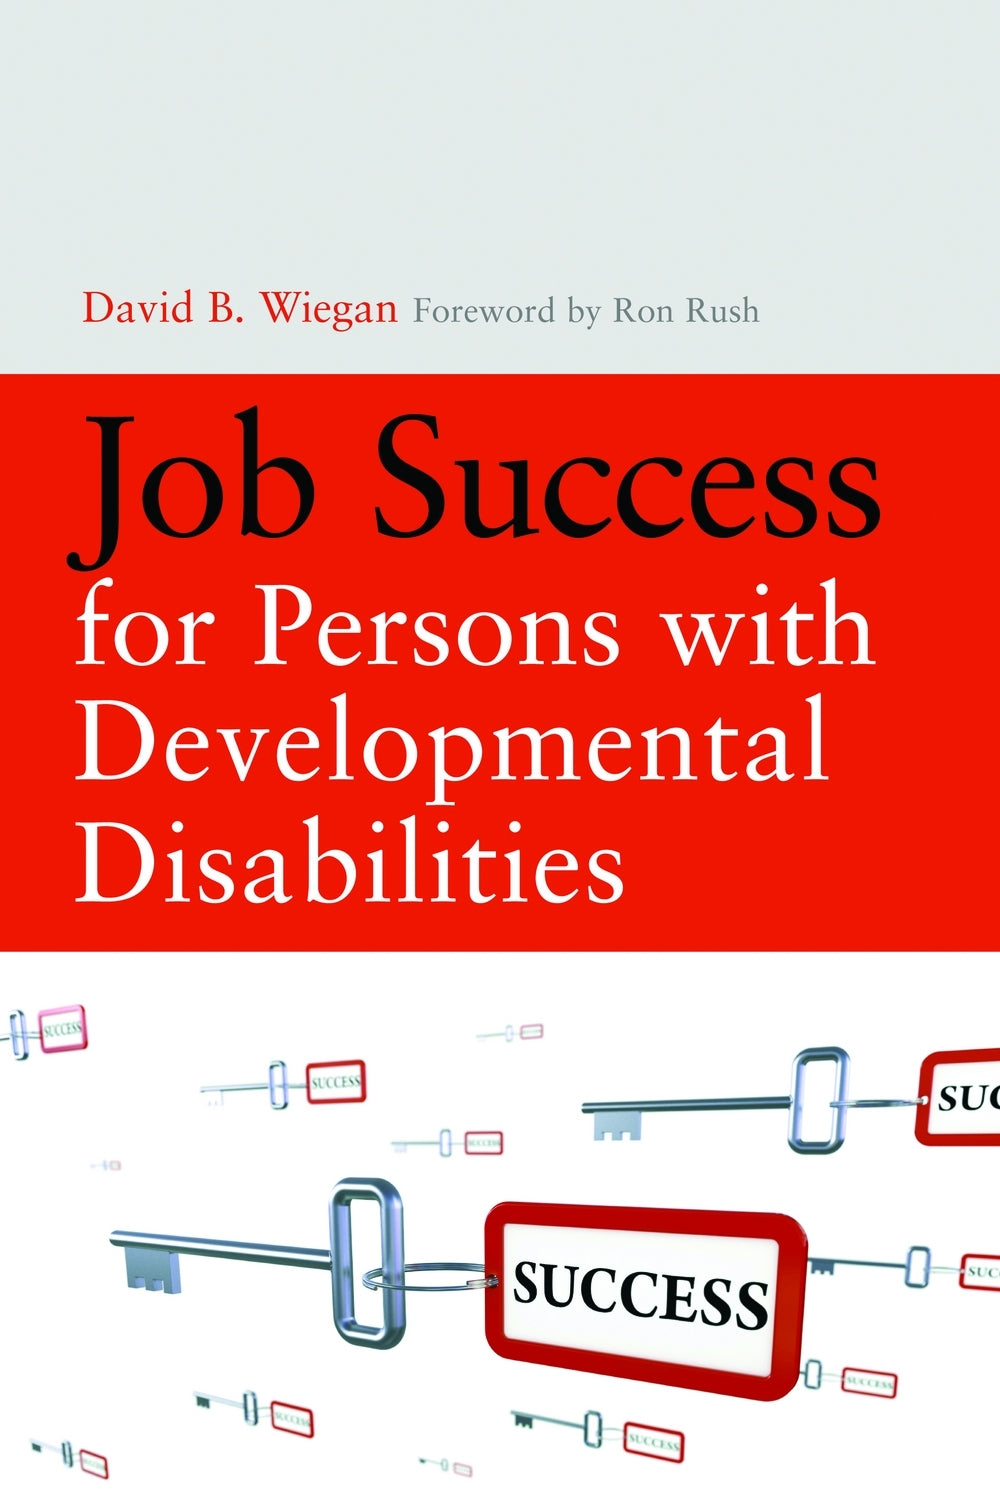 Job Success for Persons with Developmental Disabilities by David Wiegan, Ron Rush